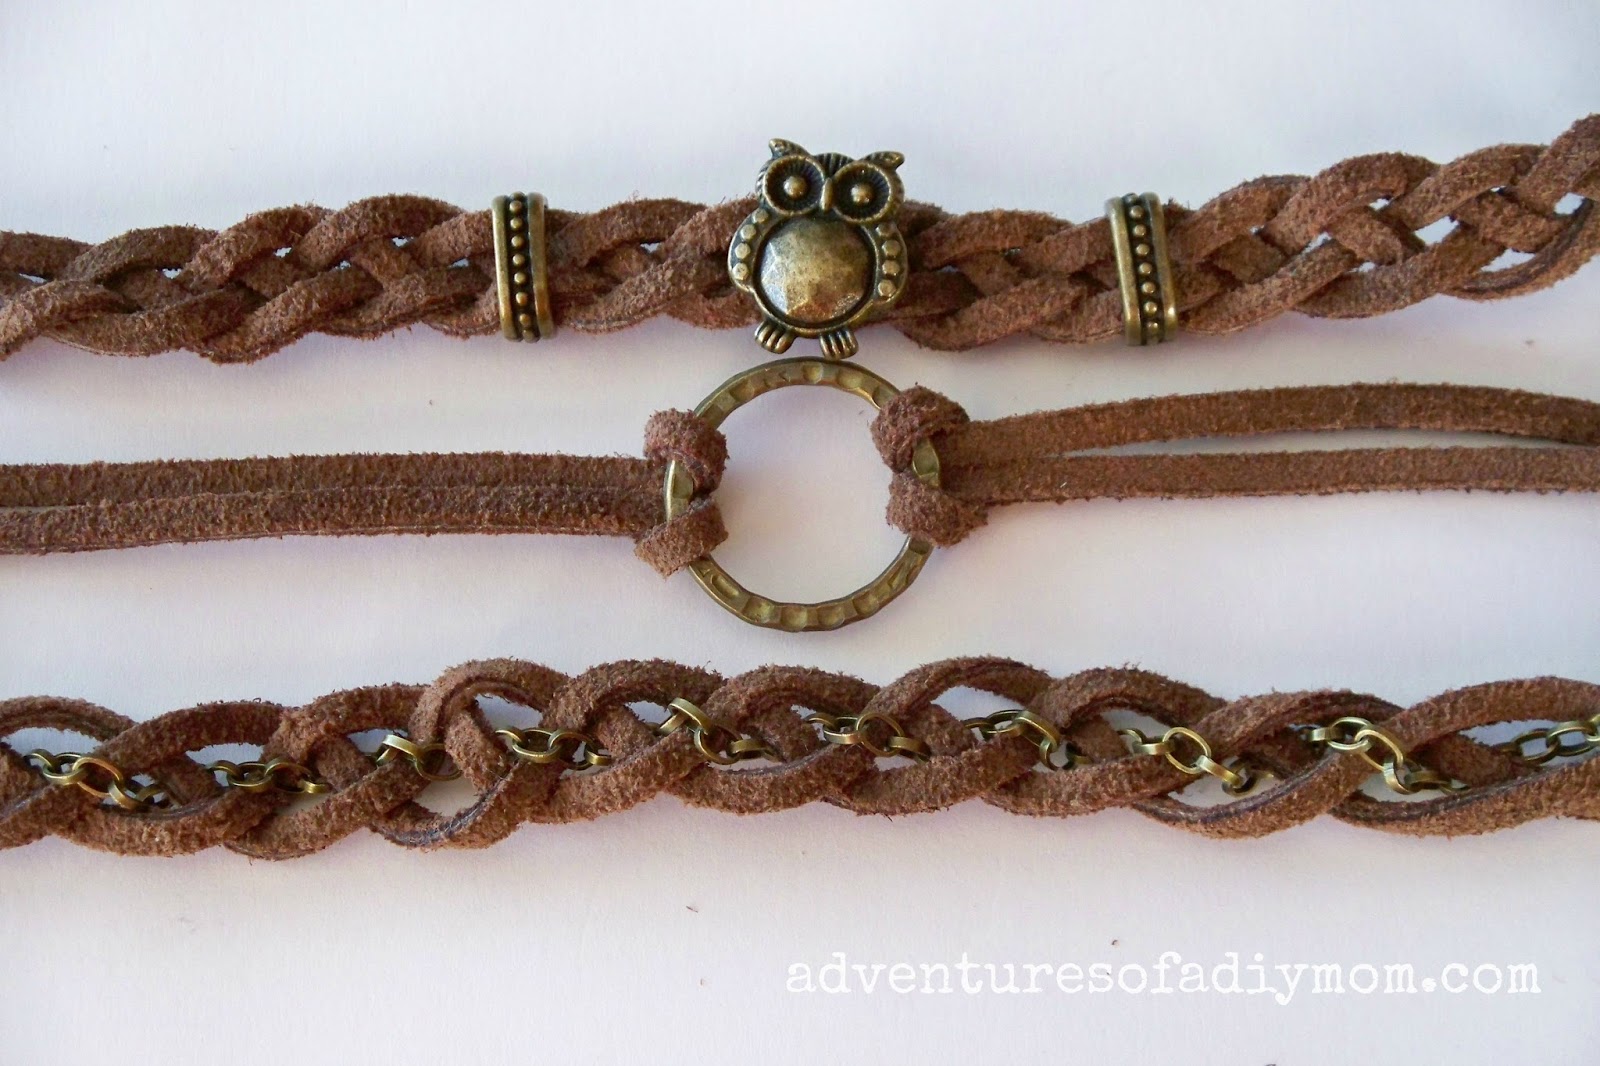 How to Make Braided Leather Stacked Bracelets - Adventures of a DIY Mom